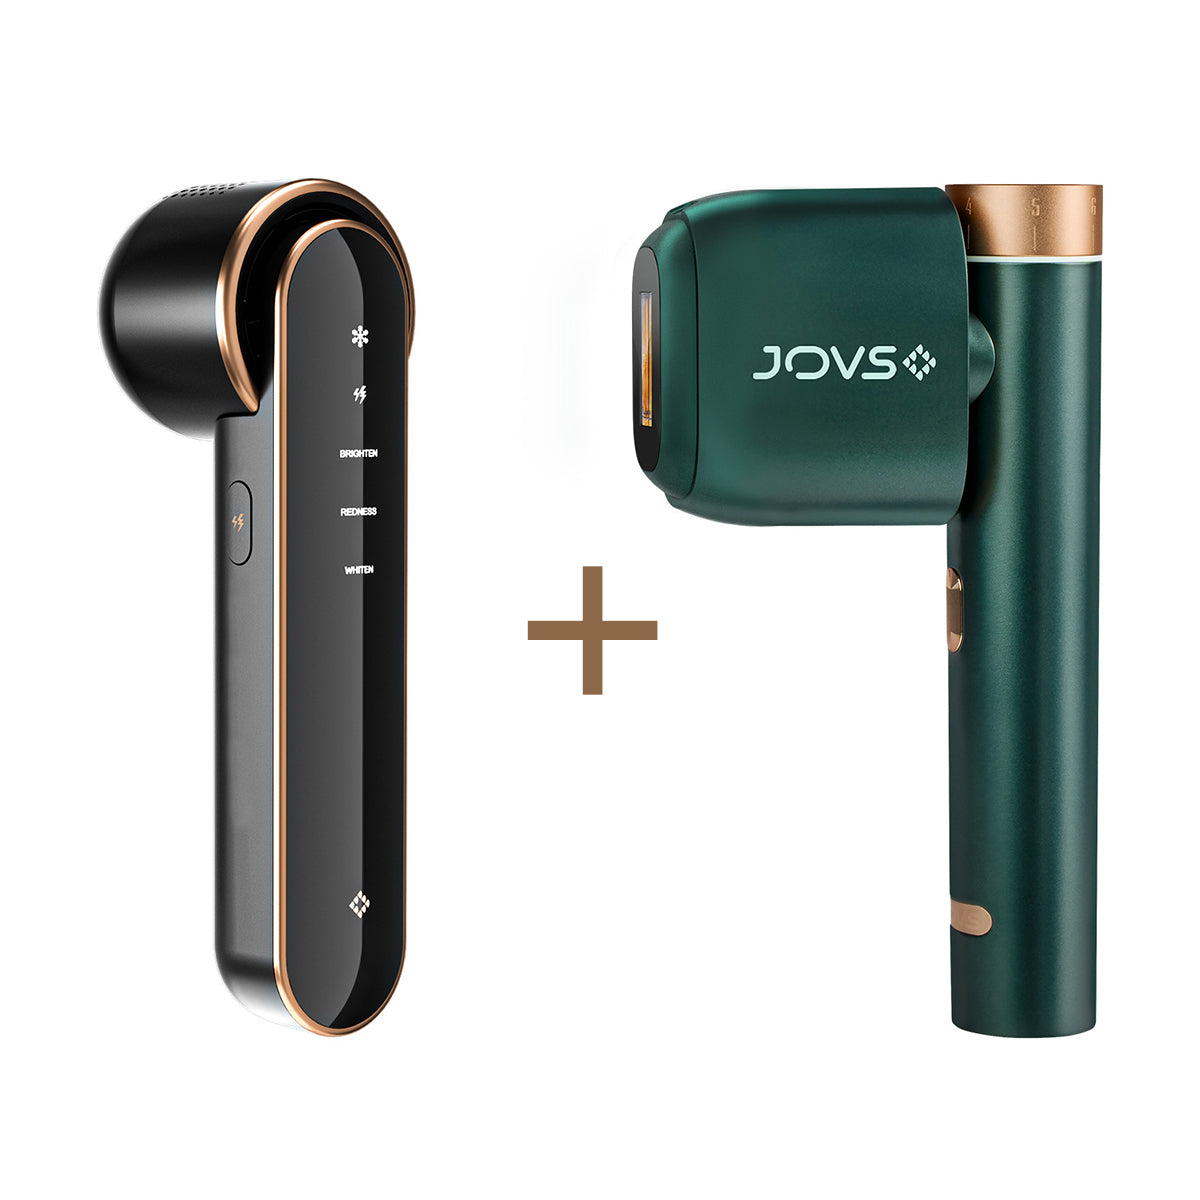 JOVS Blacken DPL Photofacial Skincare Device paired with JOVS Venus Pro II IPL Hair Removal Device for comprehensive skin and hair treatment.